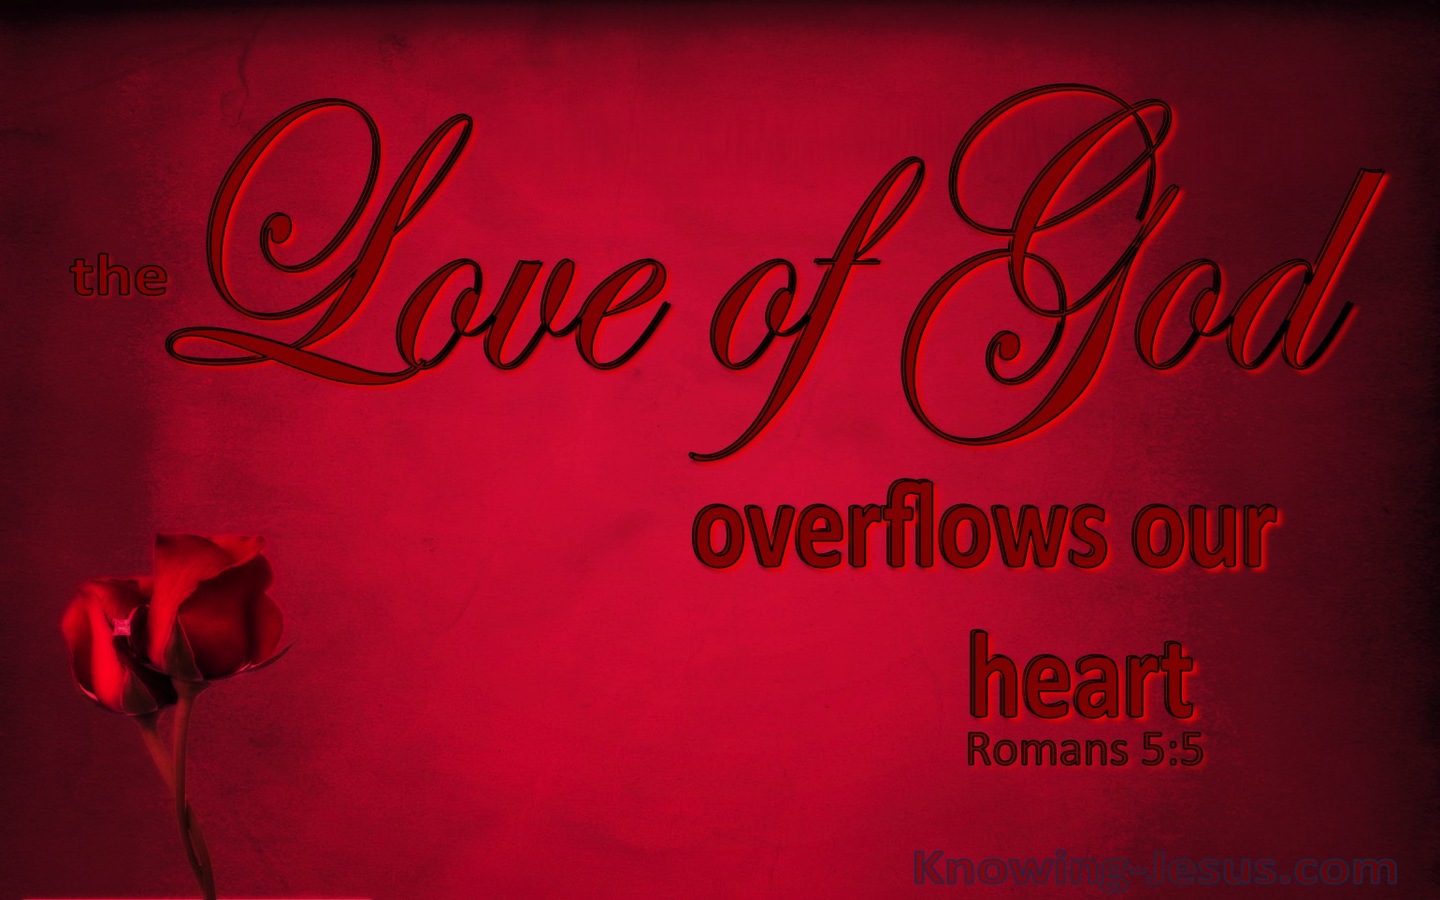 Romans 5:5 The Lord Of God Overflows Our Heart (maroon)